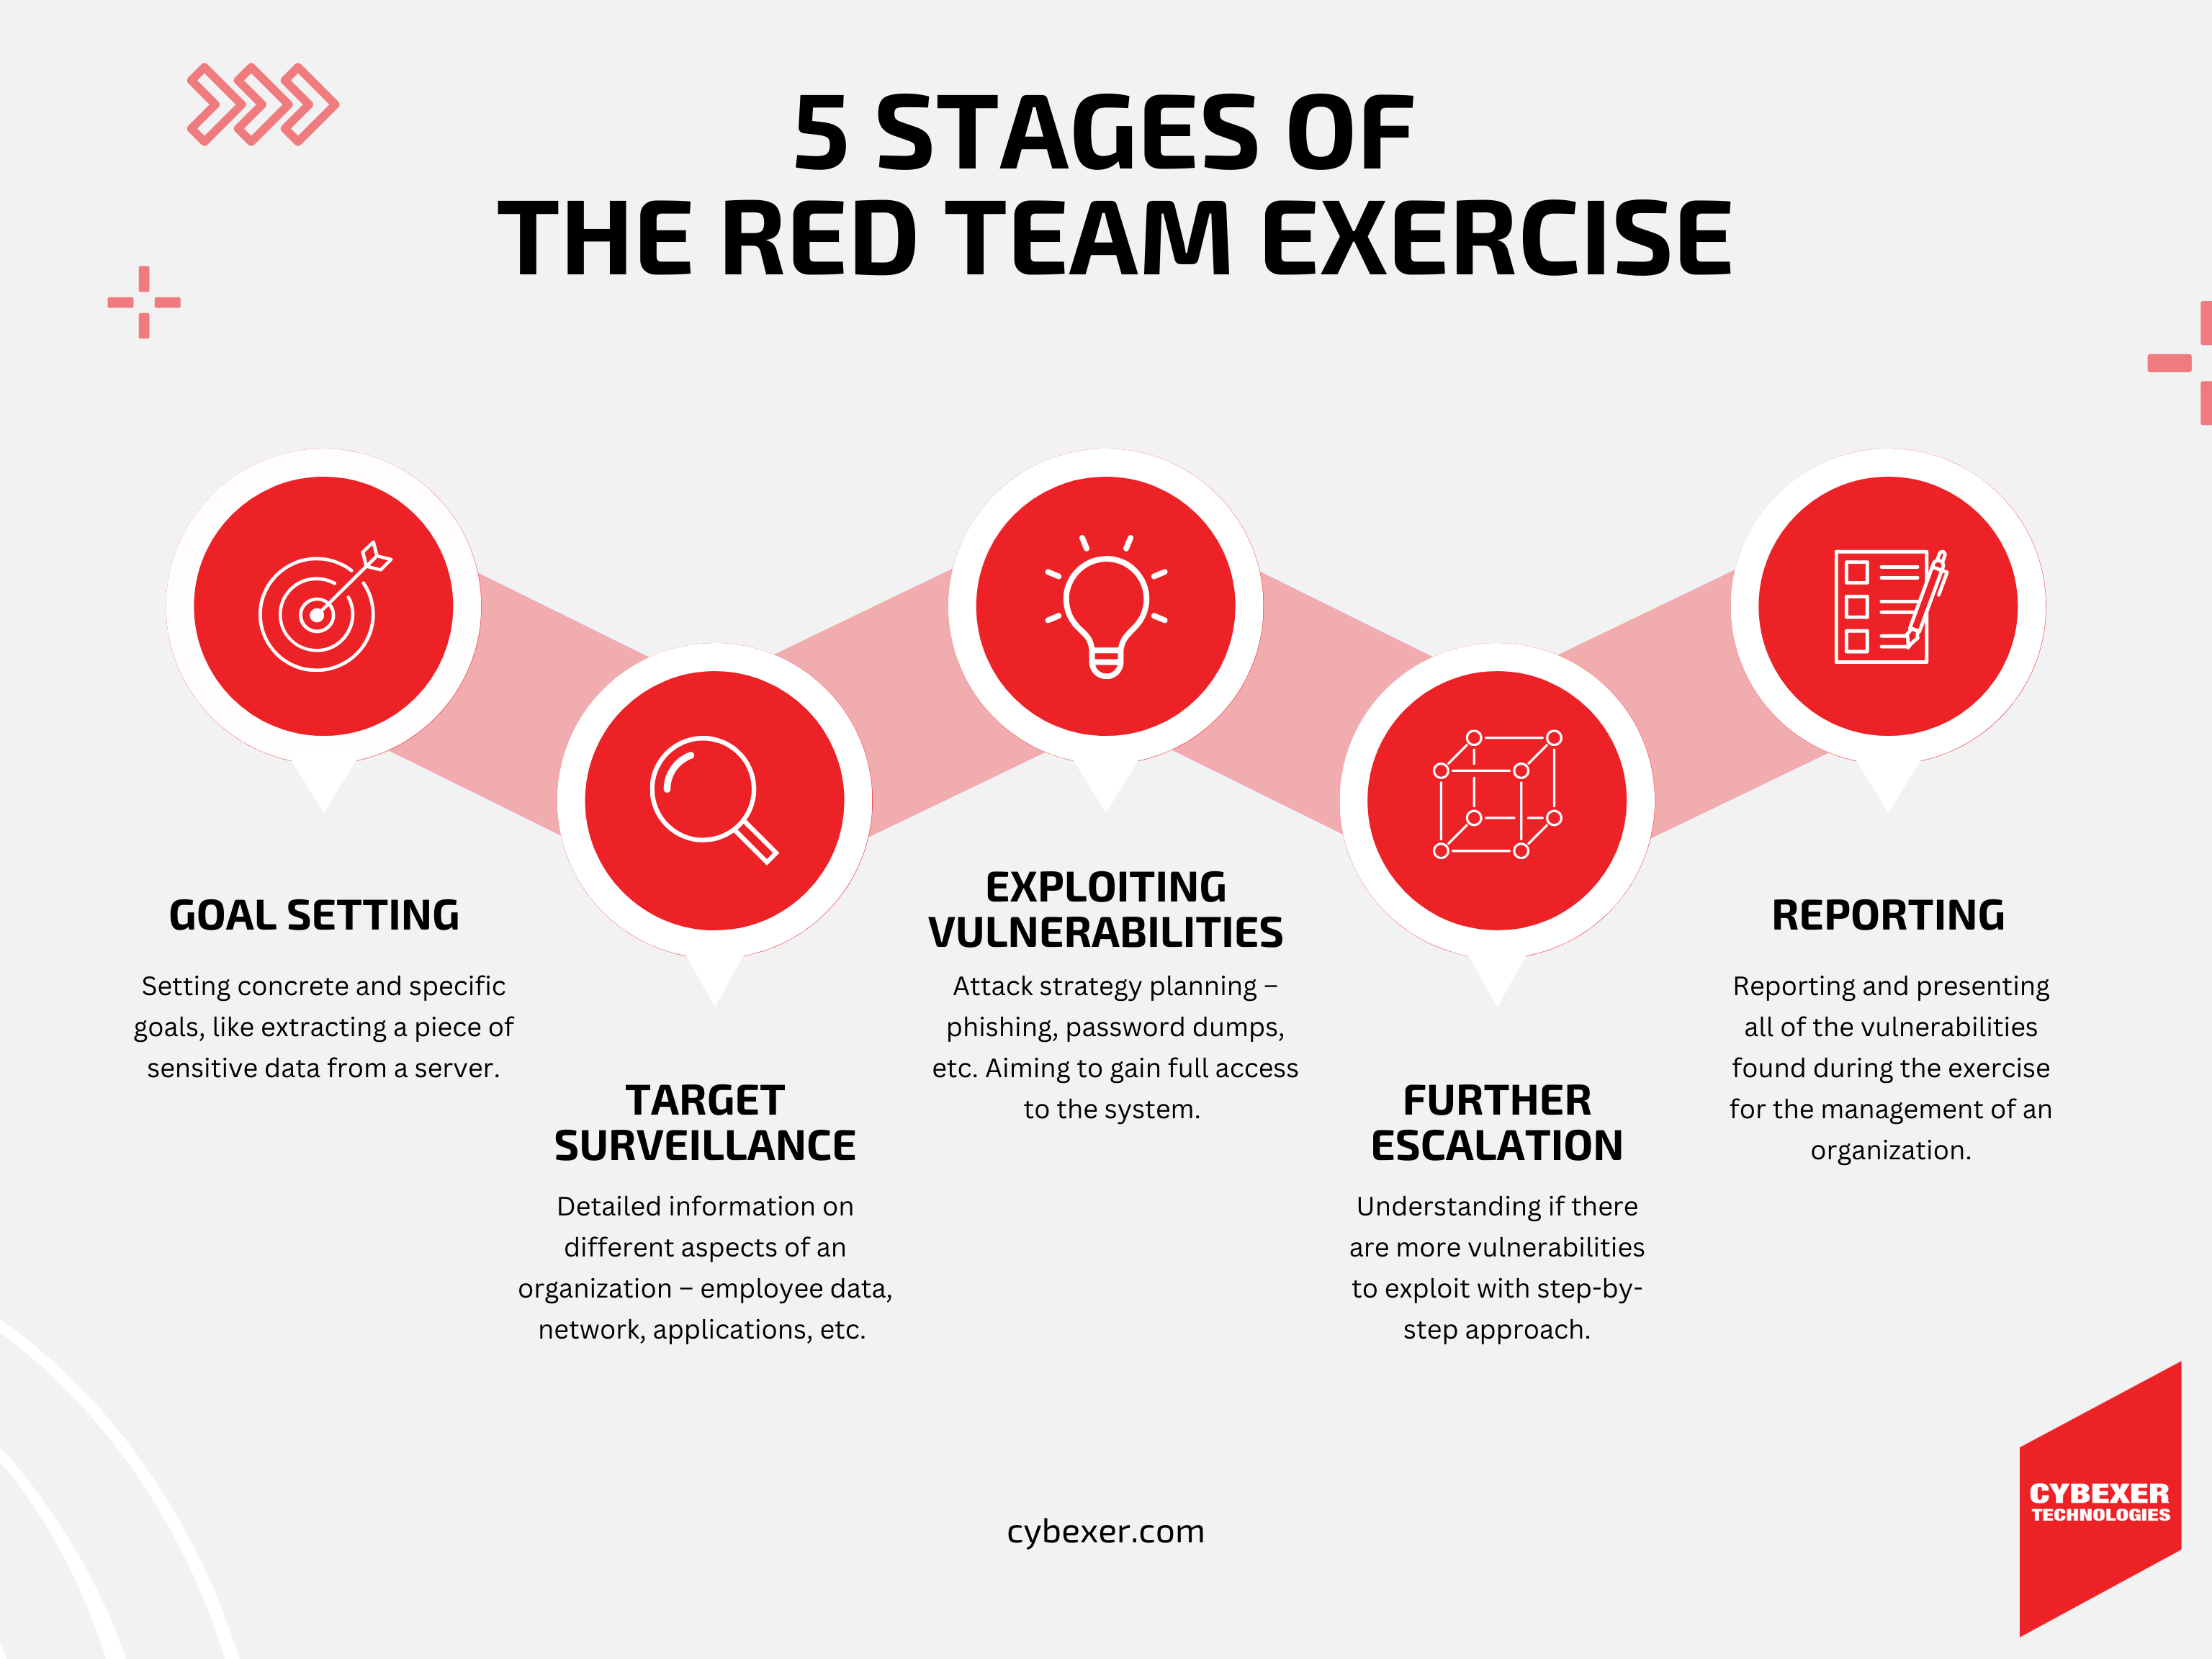 5 Stages of the Red Team Exercise